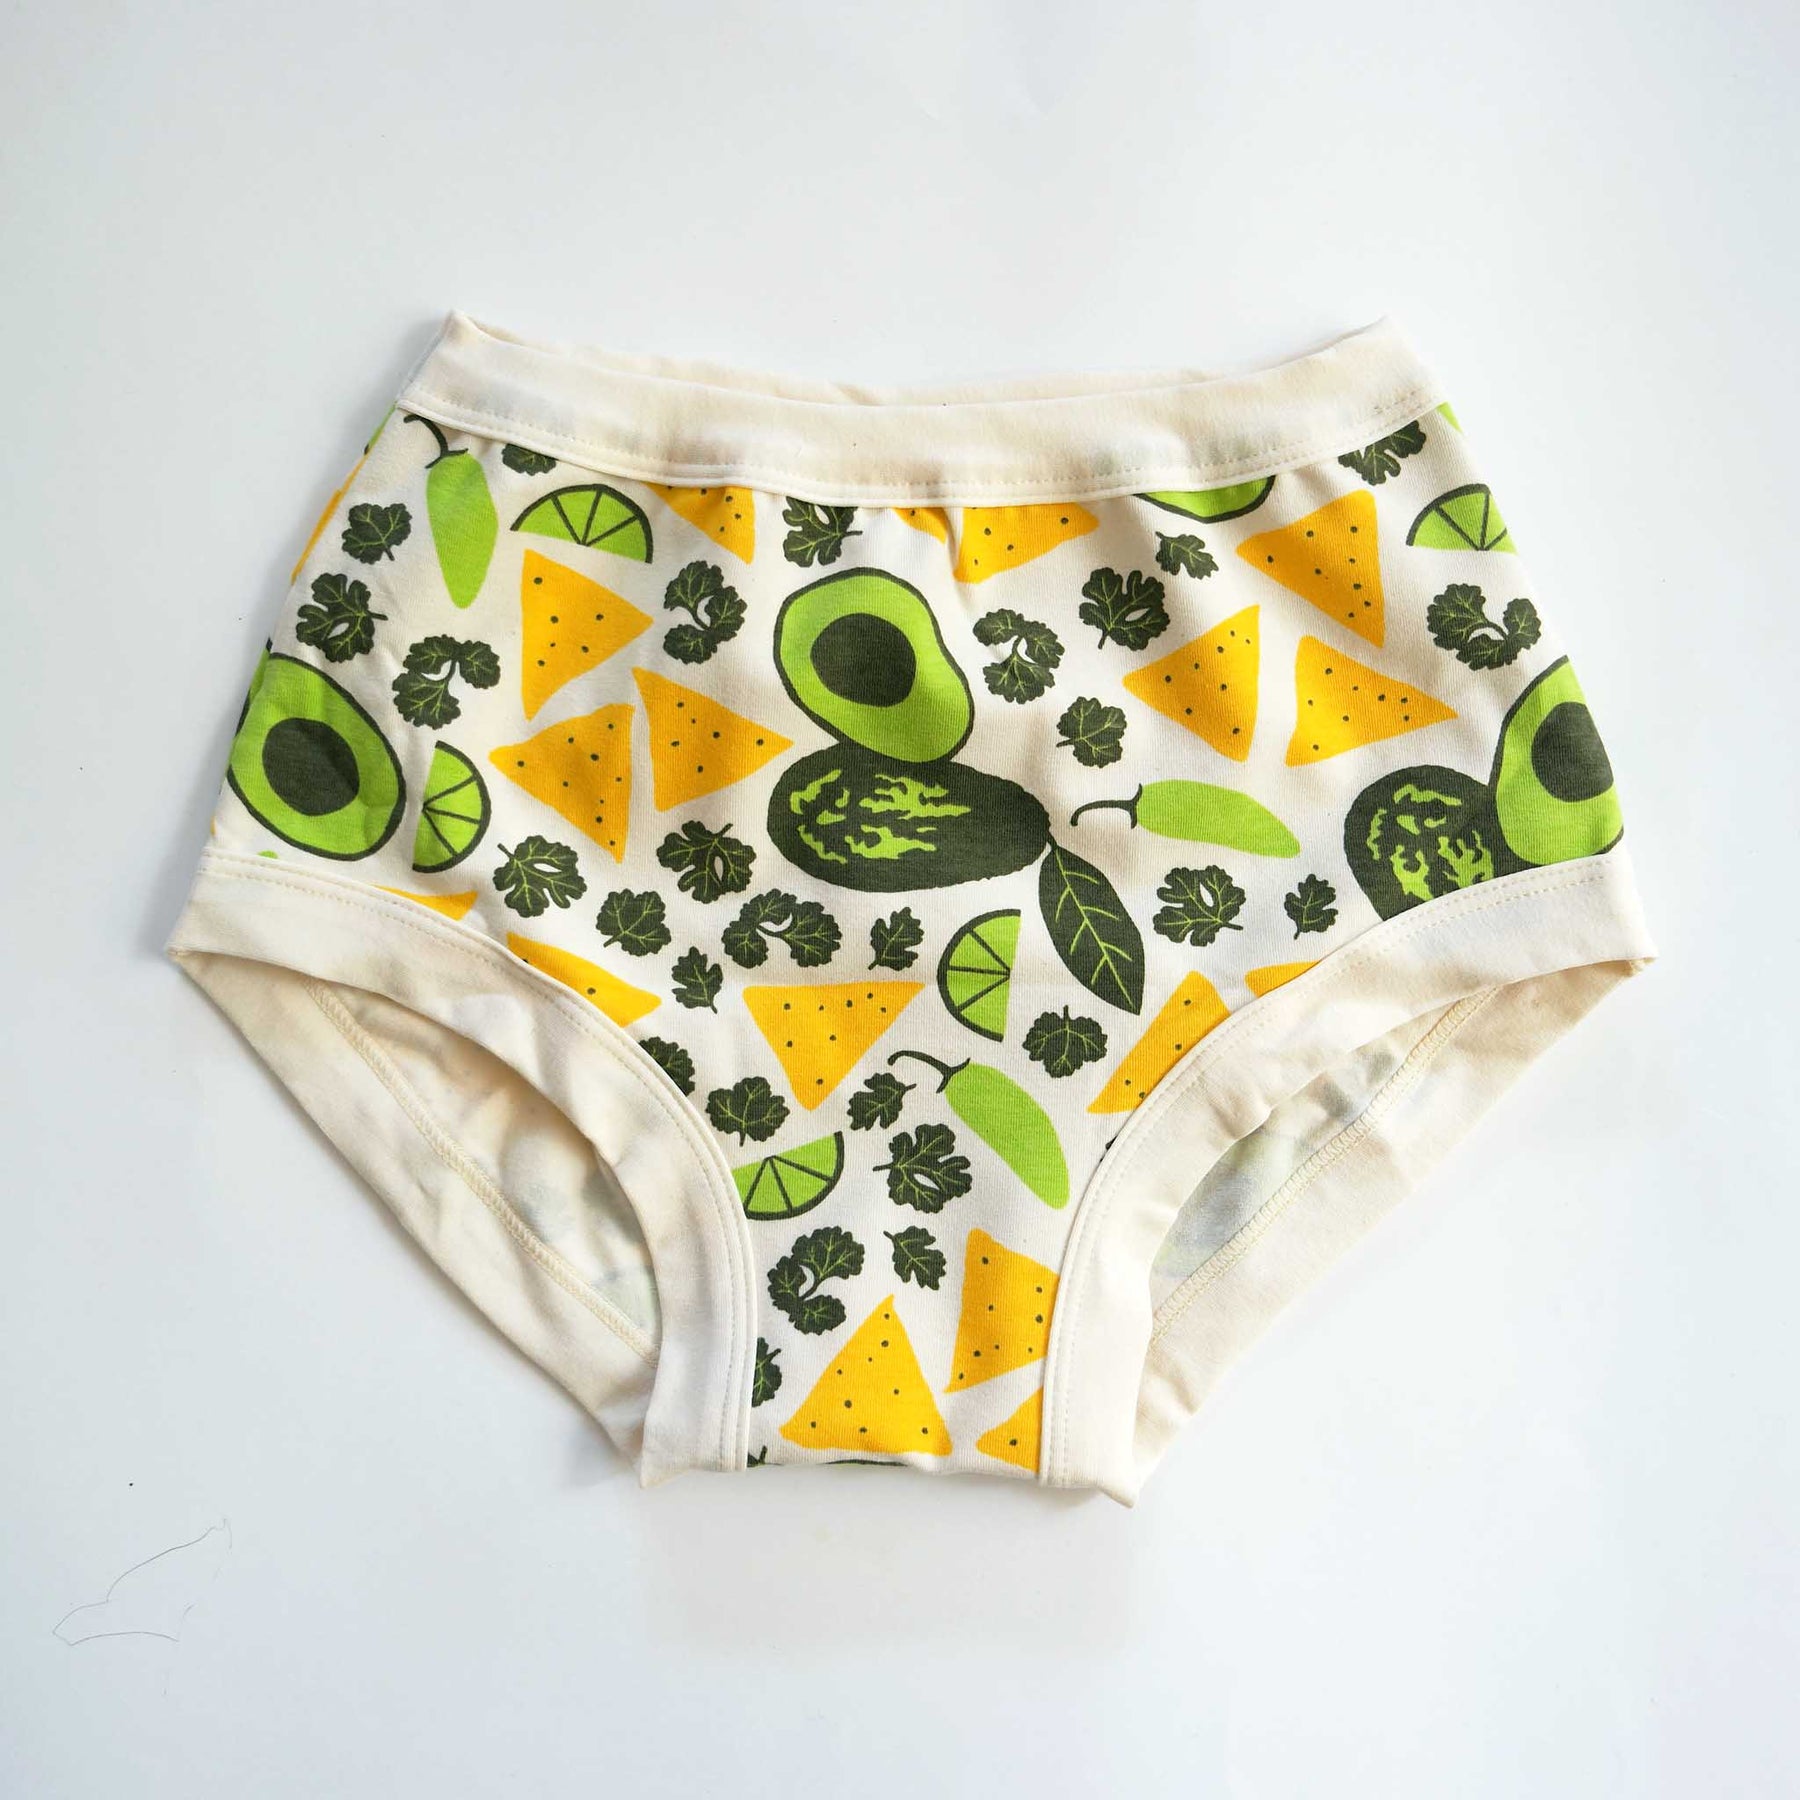 Thunderpants - Organic Cotton Underwear Made in the USA. Wedgie-Proof! –  Thunderpants USA